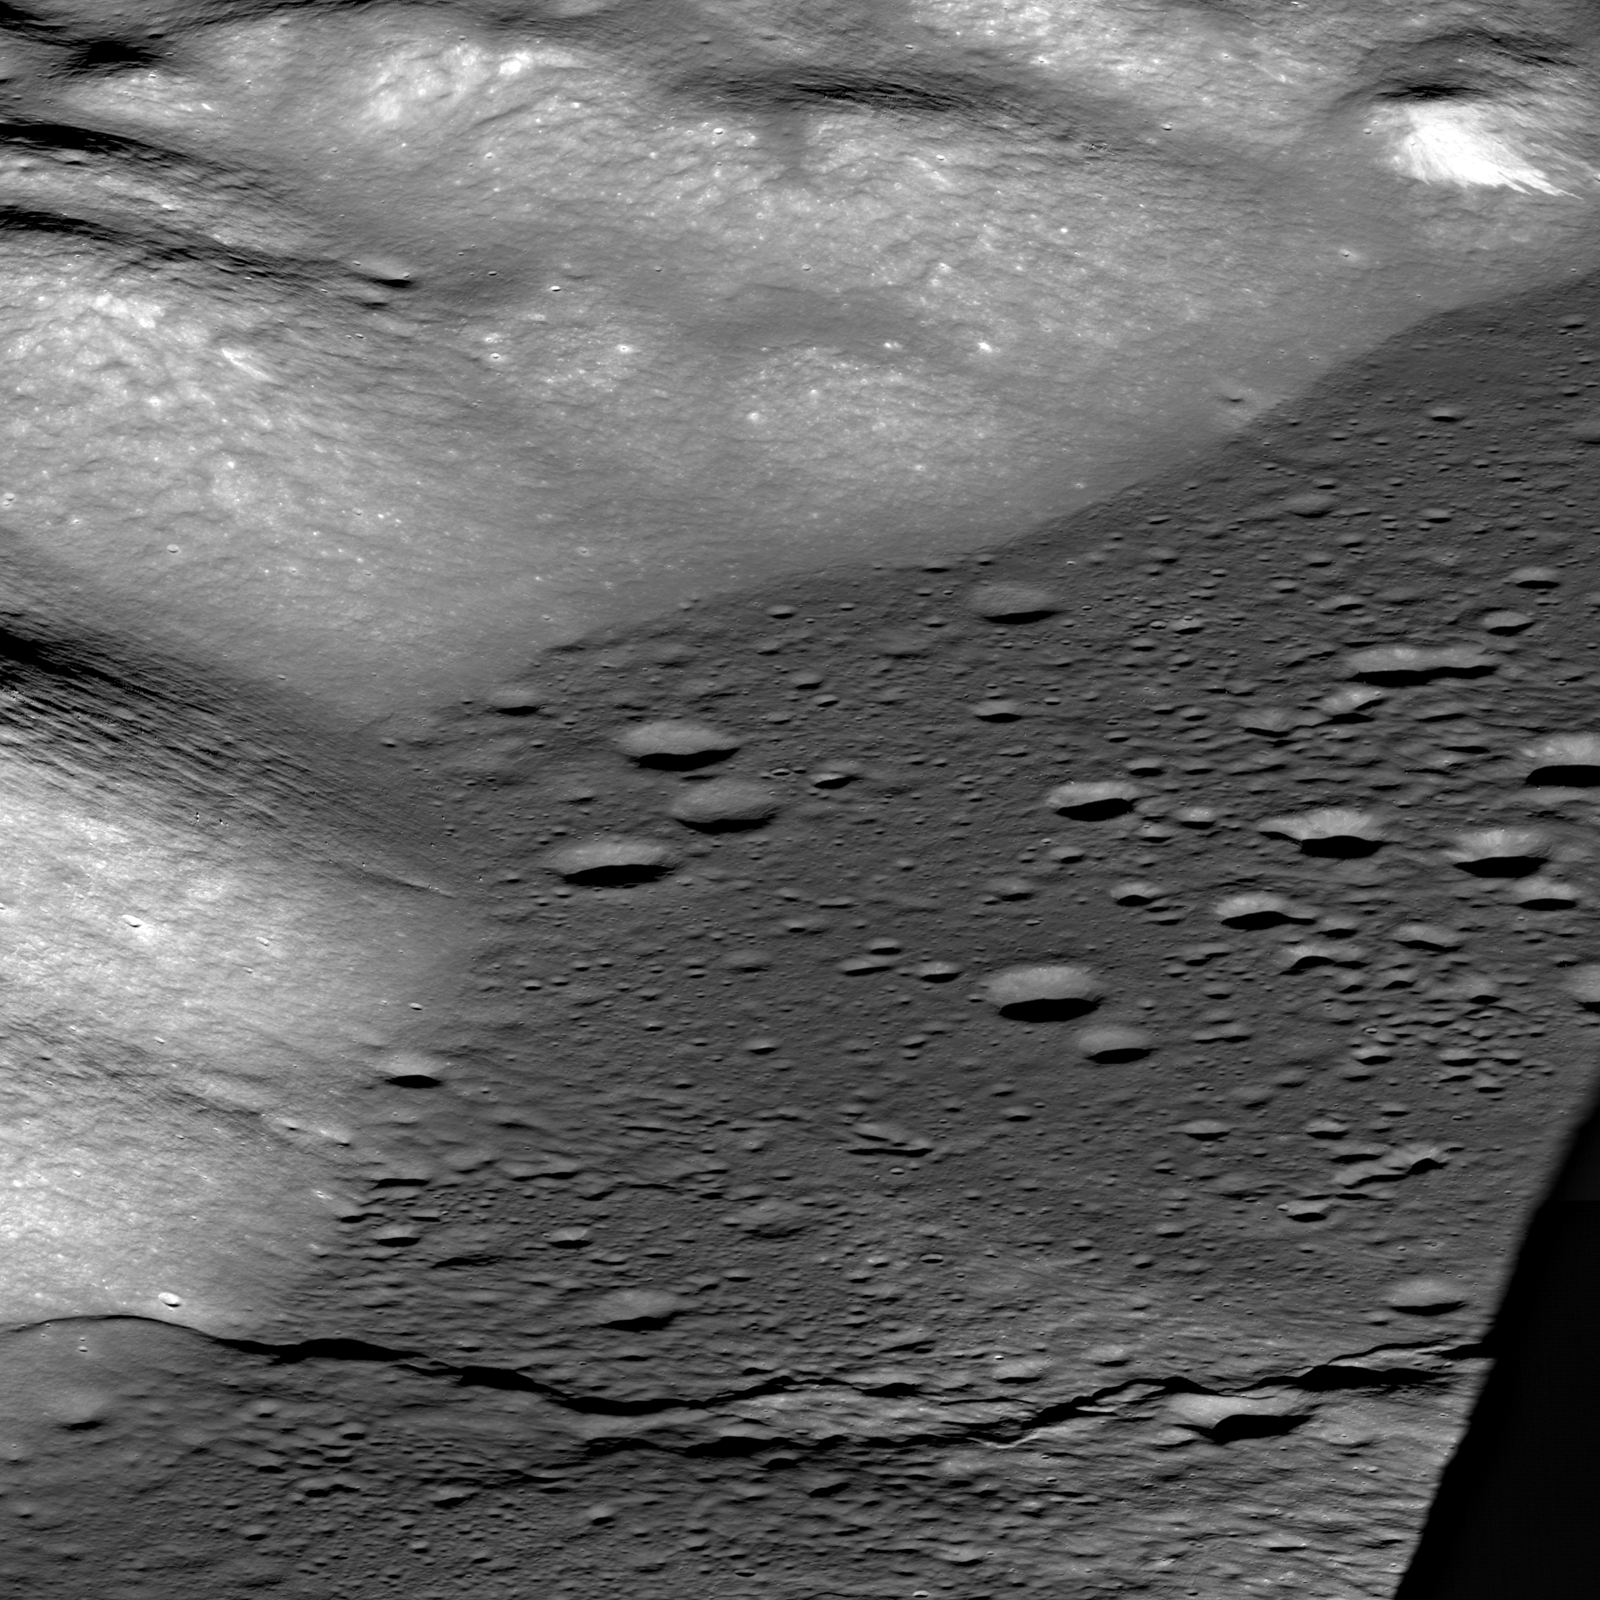 Taurus Littrow Valley, West to East